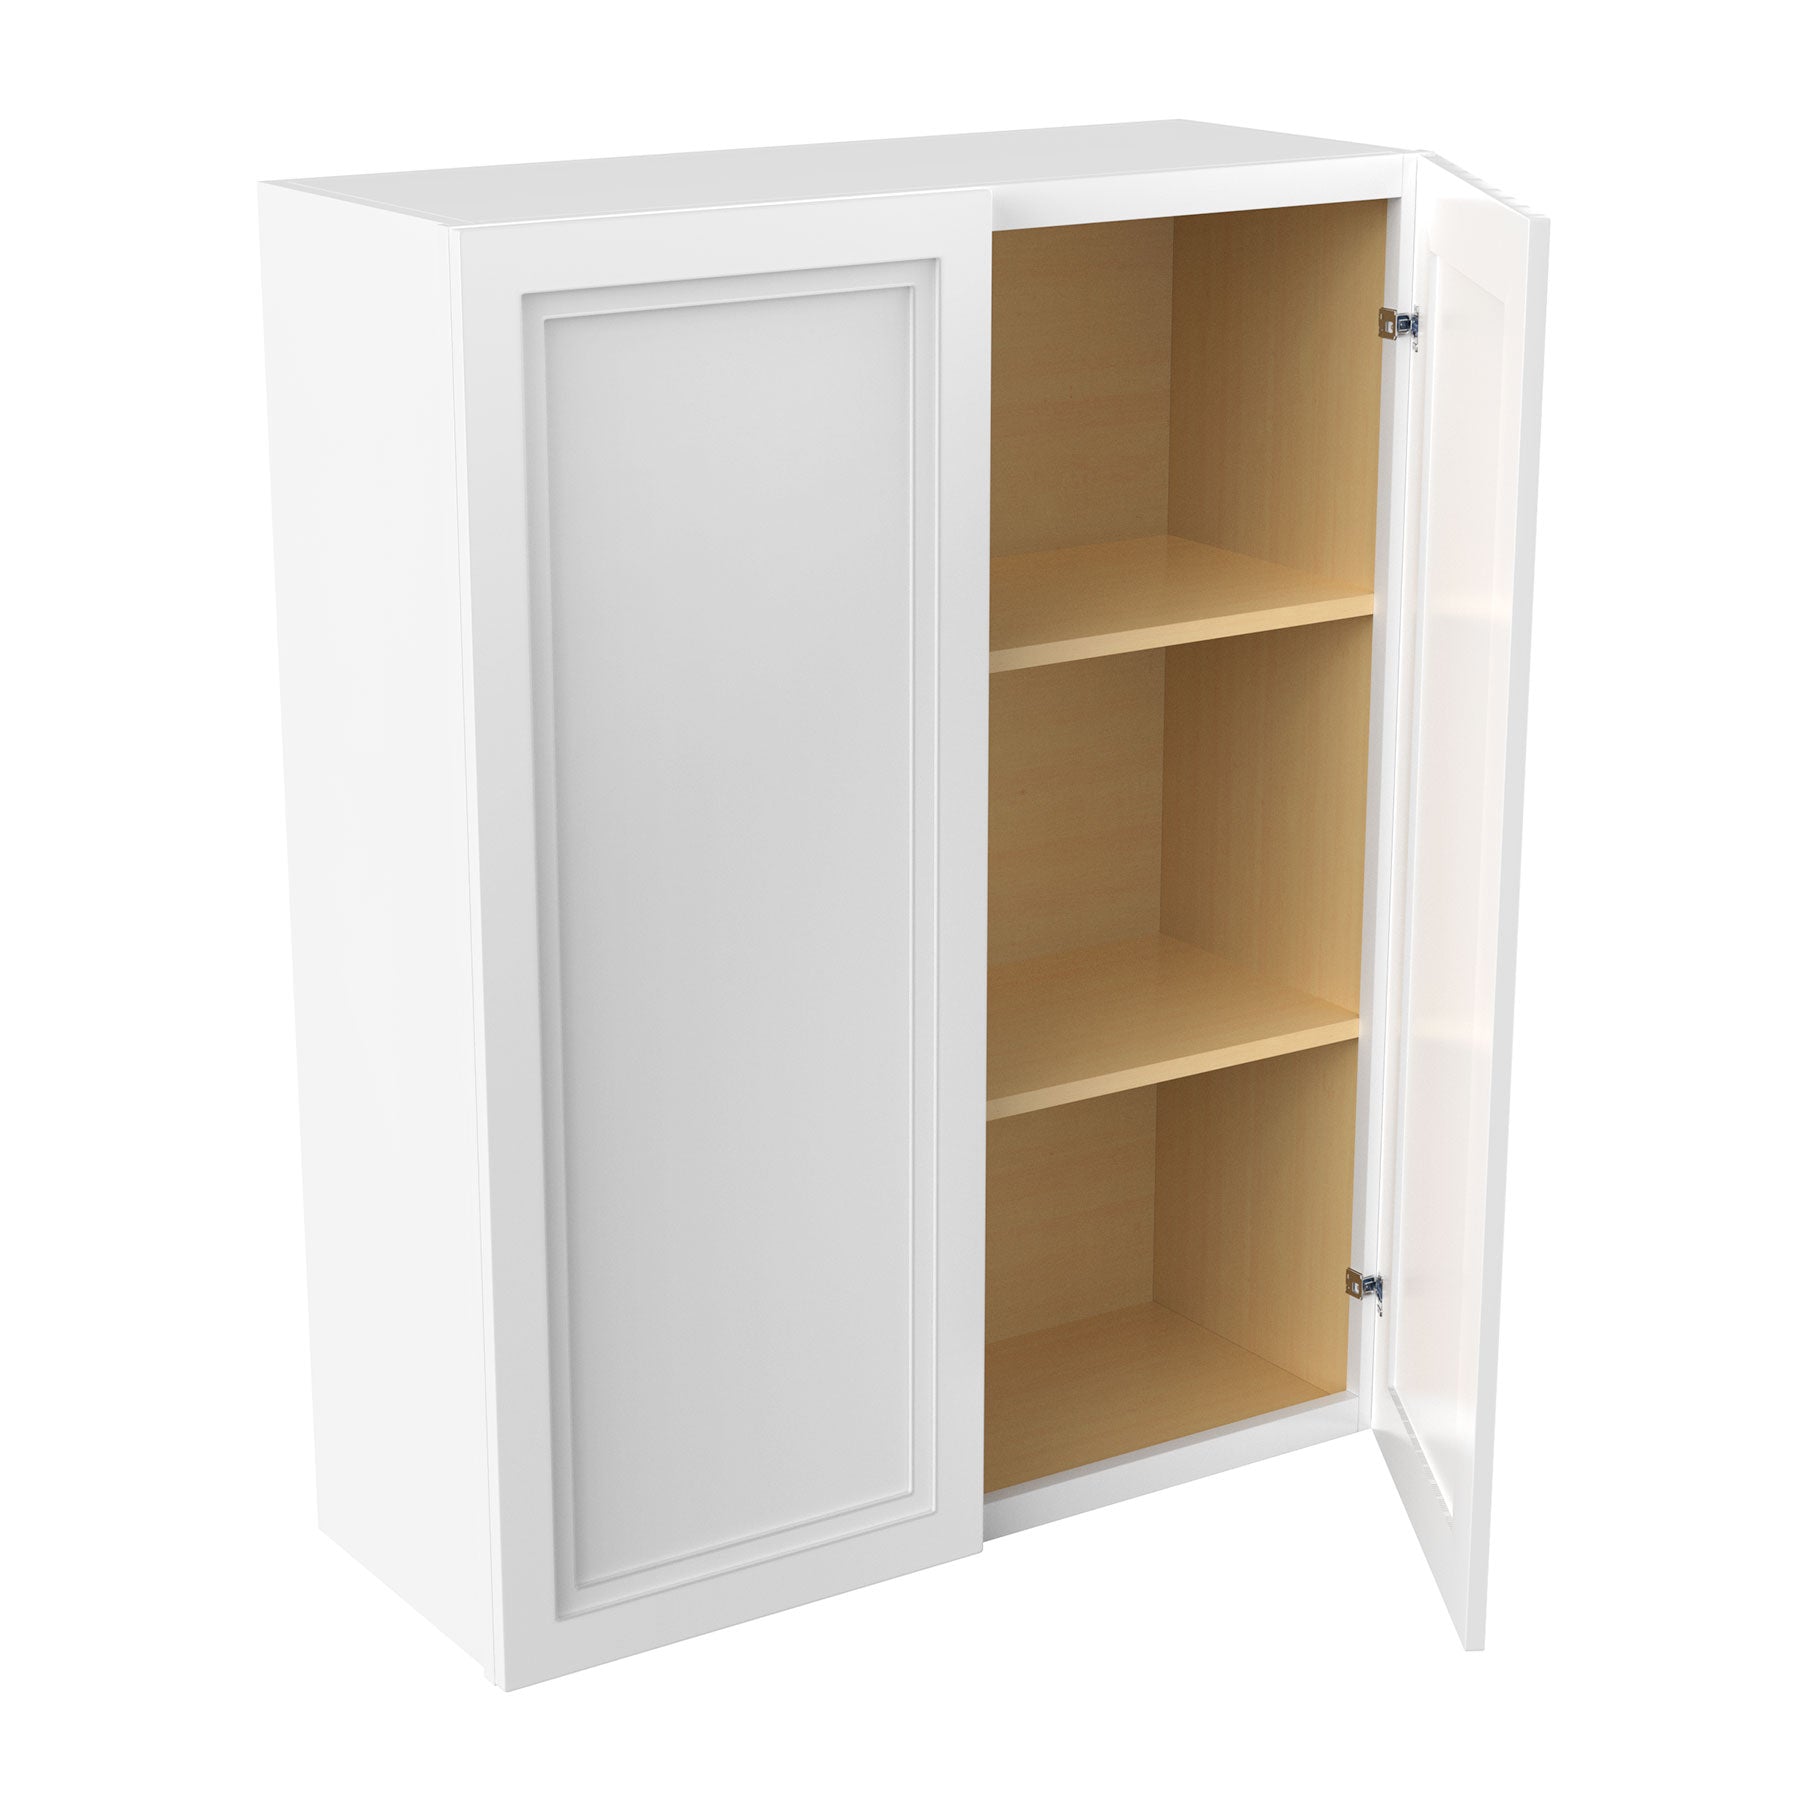 Fashion White - Double Door Wall Cabinet | 33"W x 42"H x 12"D